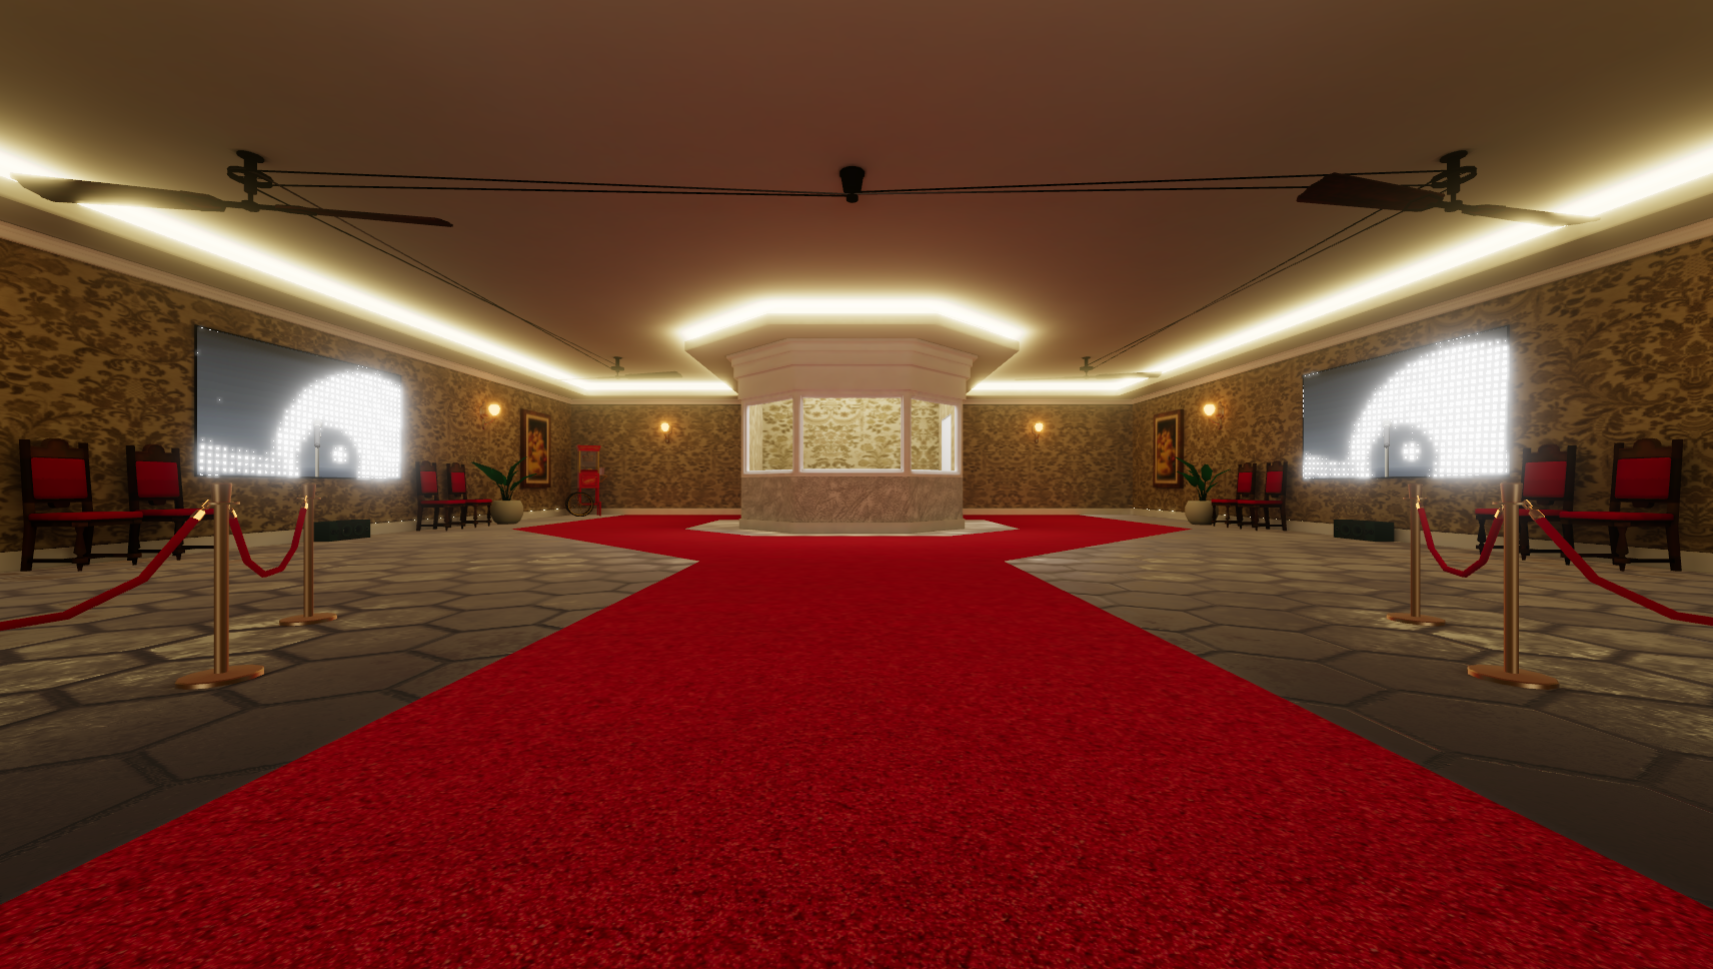 Red velvet ropes or cordones keep users funneled towards or away from the main theater door.